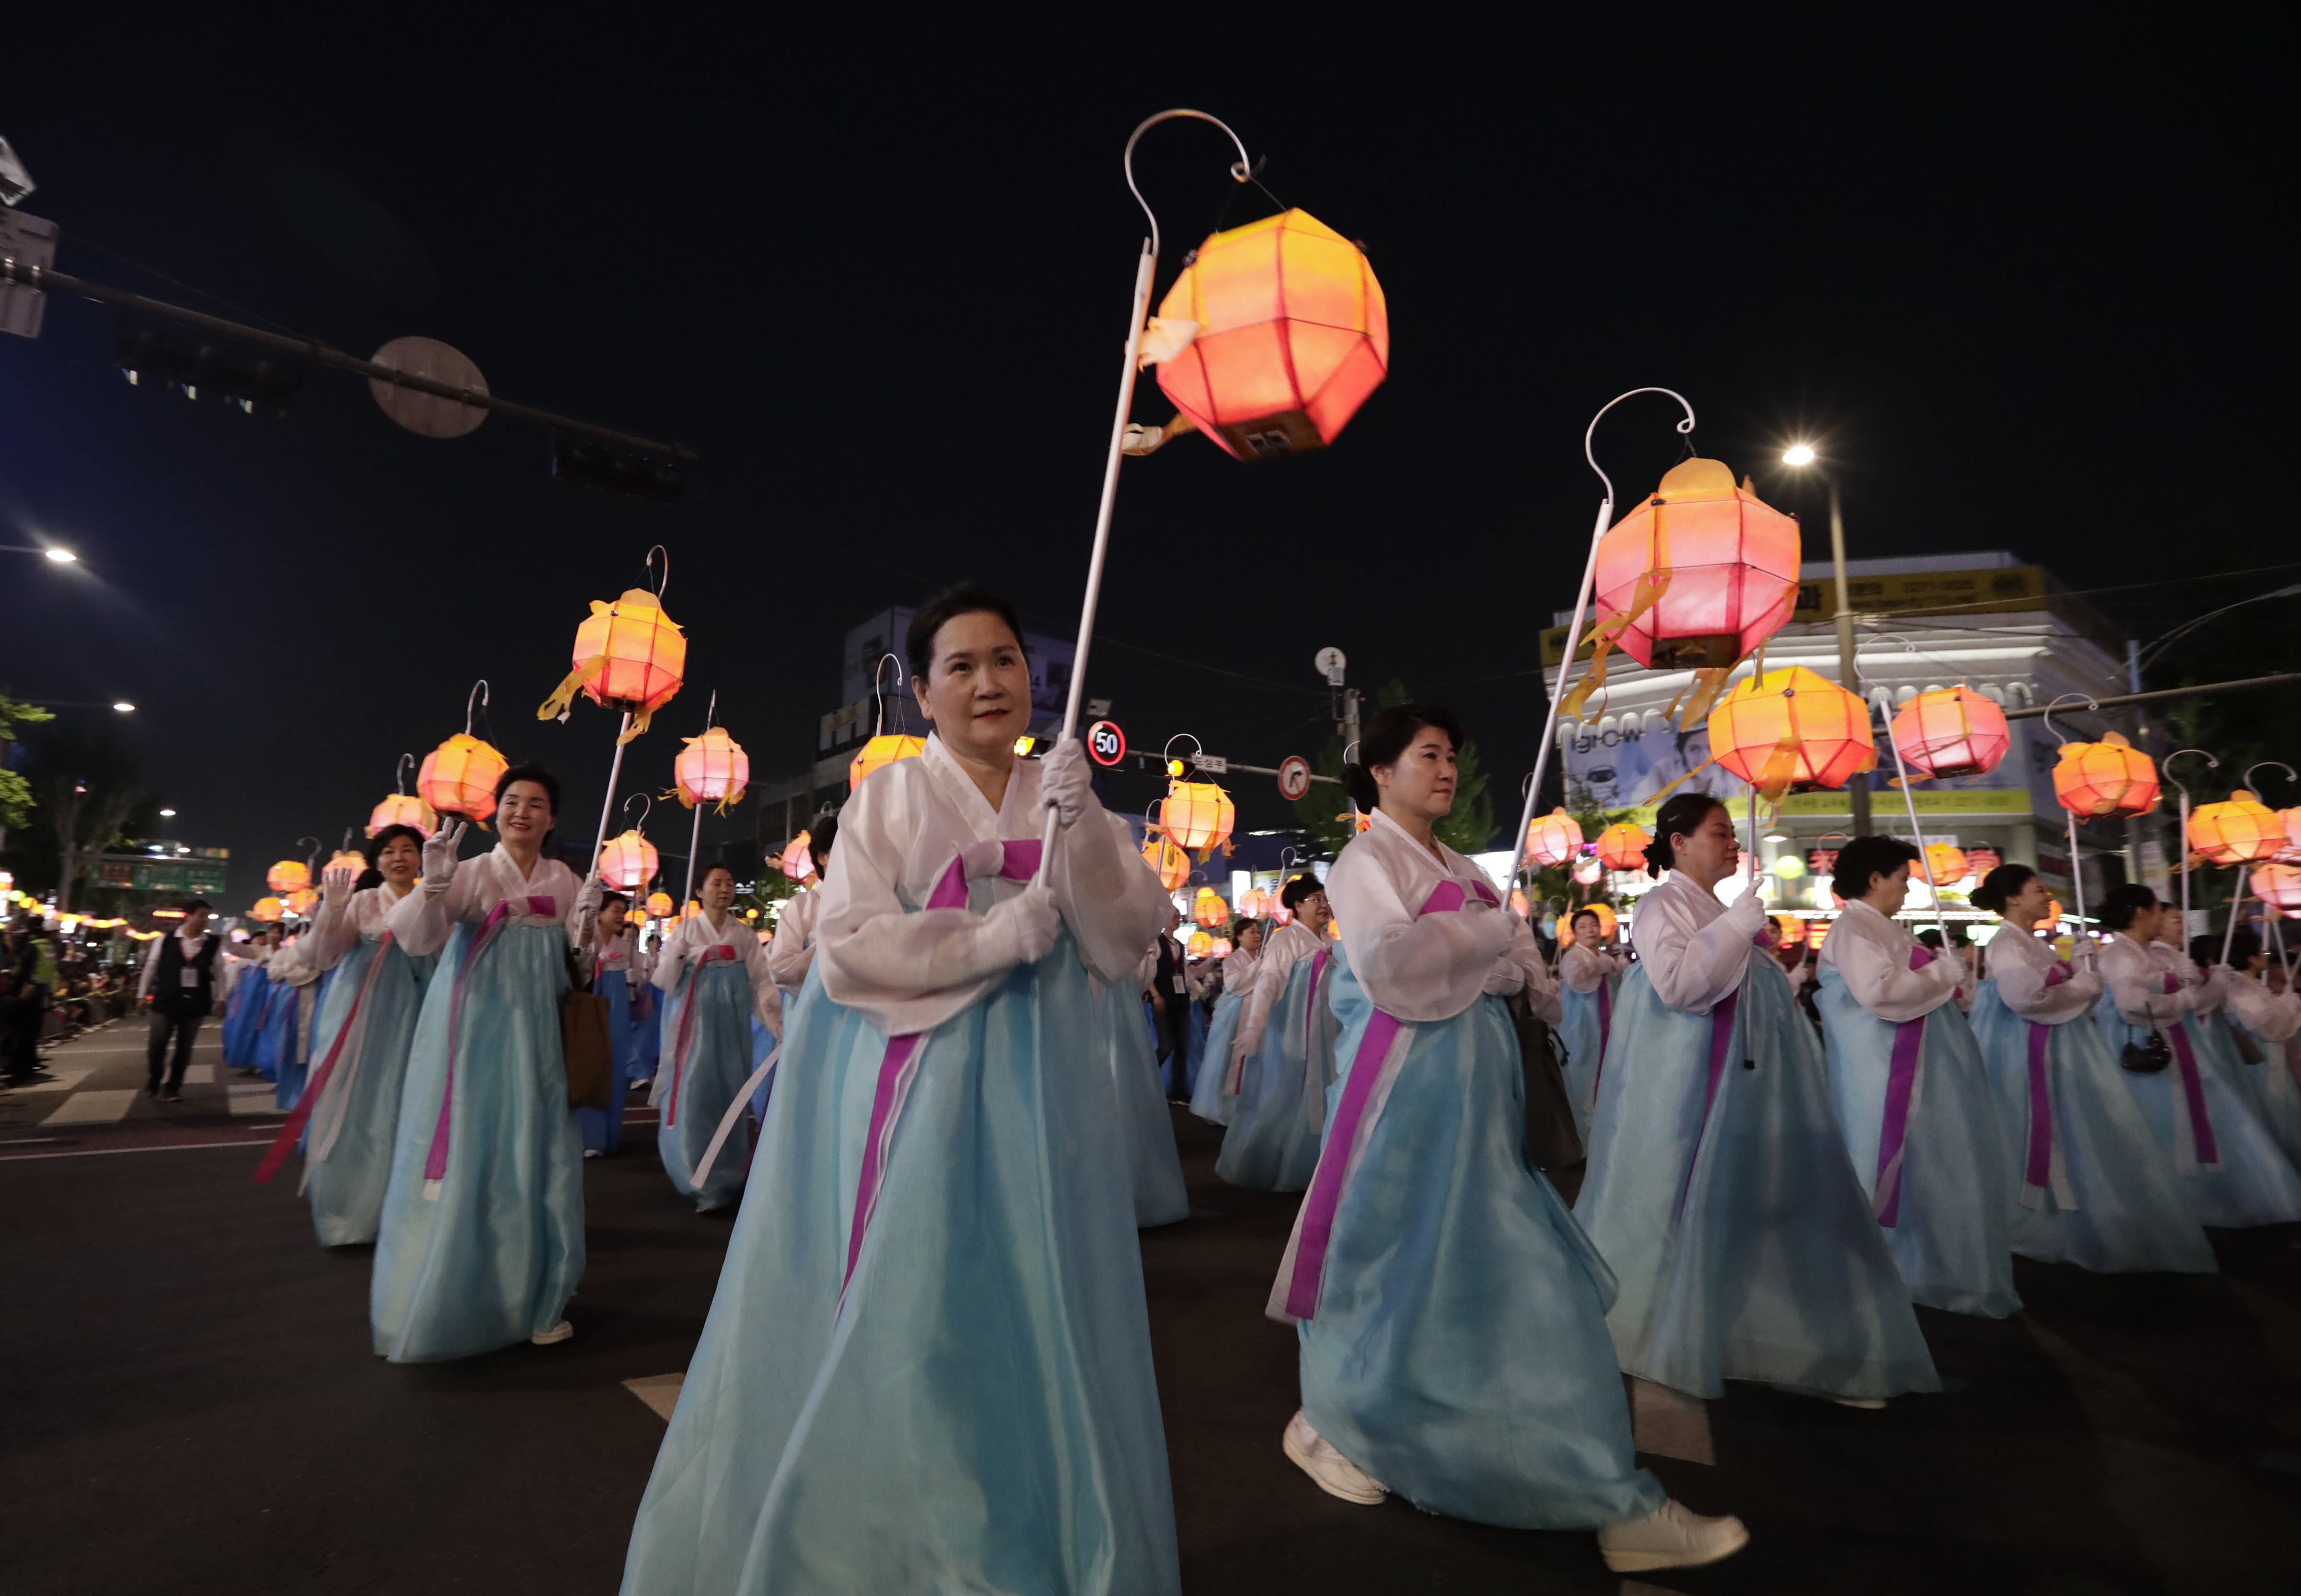 Buddhists carry lanterns in a parade during the Lotus Lantern Festival to celebrate the upcoming birthday of Buddha on May 12, in Seoul, South Korea, Saturday, May 4, 2019. (AP Photo/Lee Jin-man)